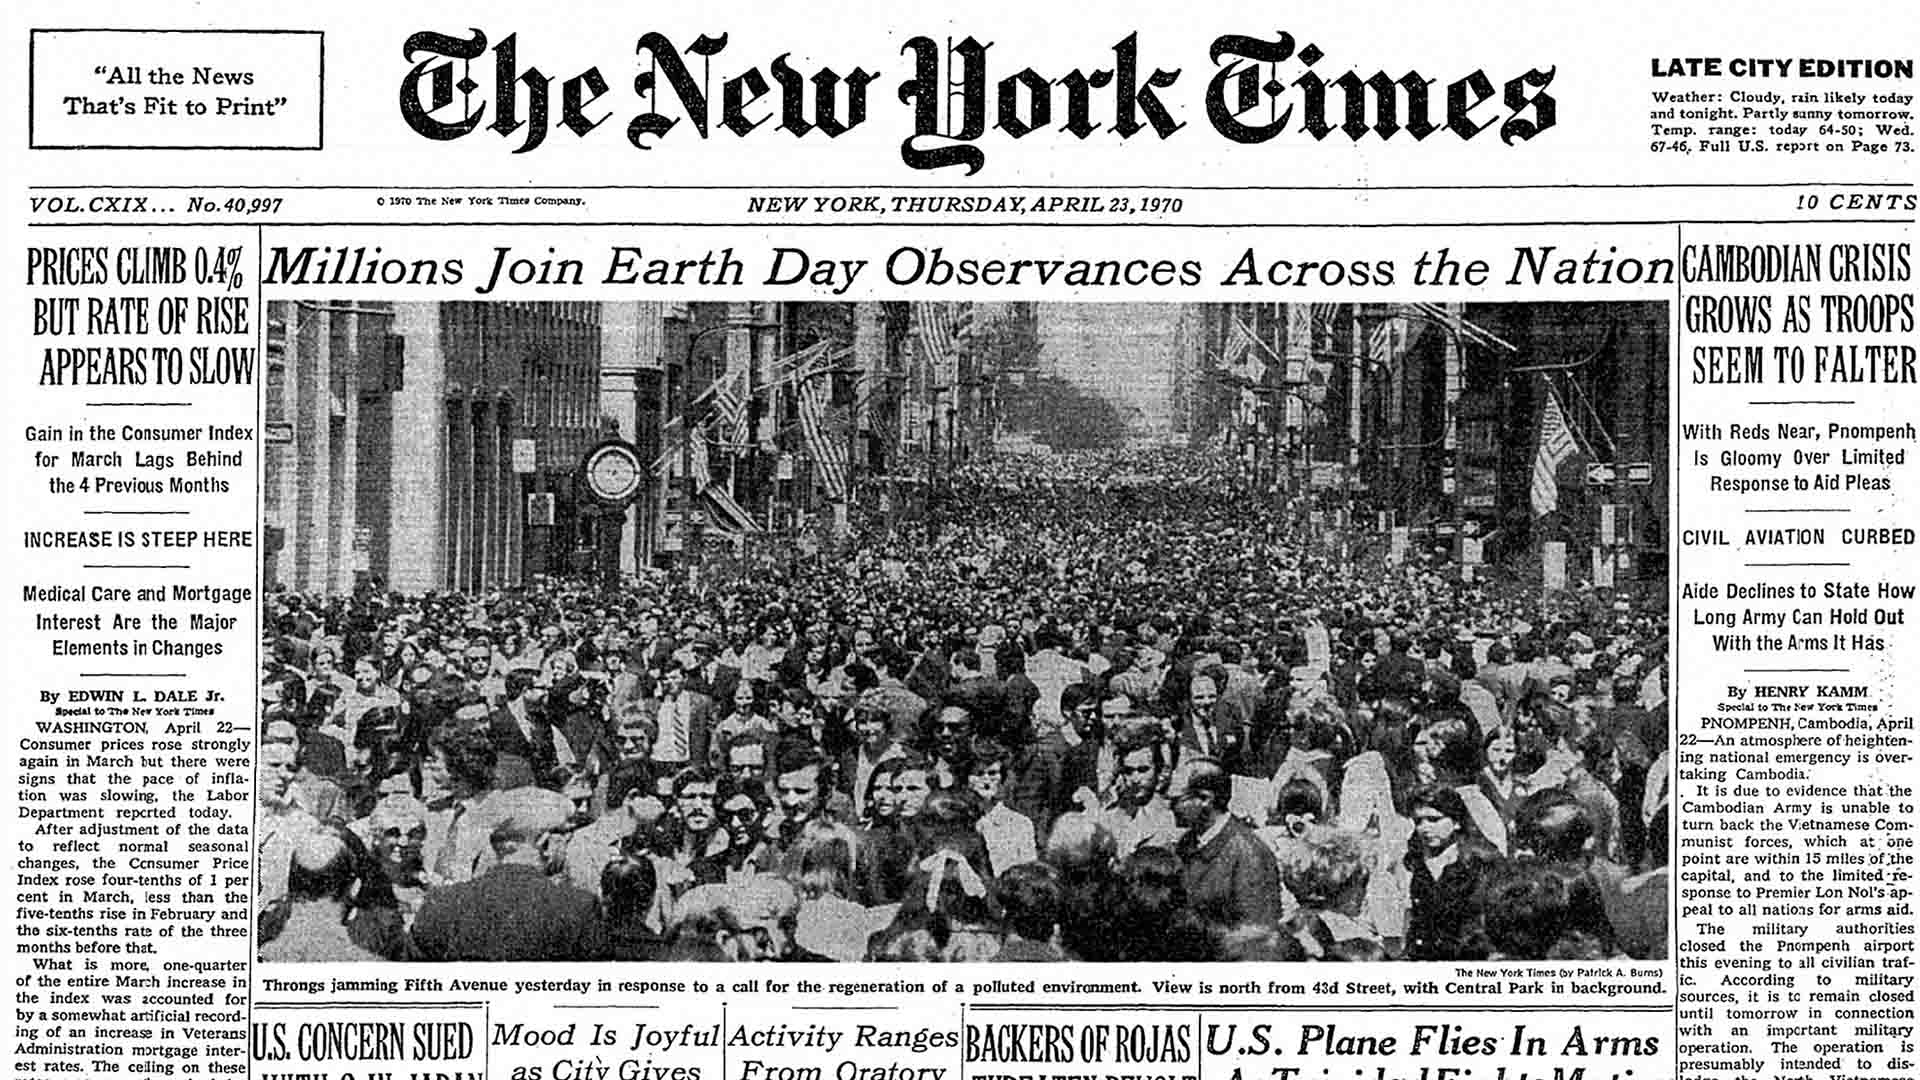 New York Times coverage of first Earth Day, 1970